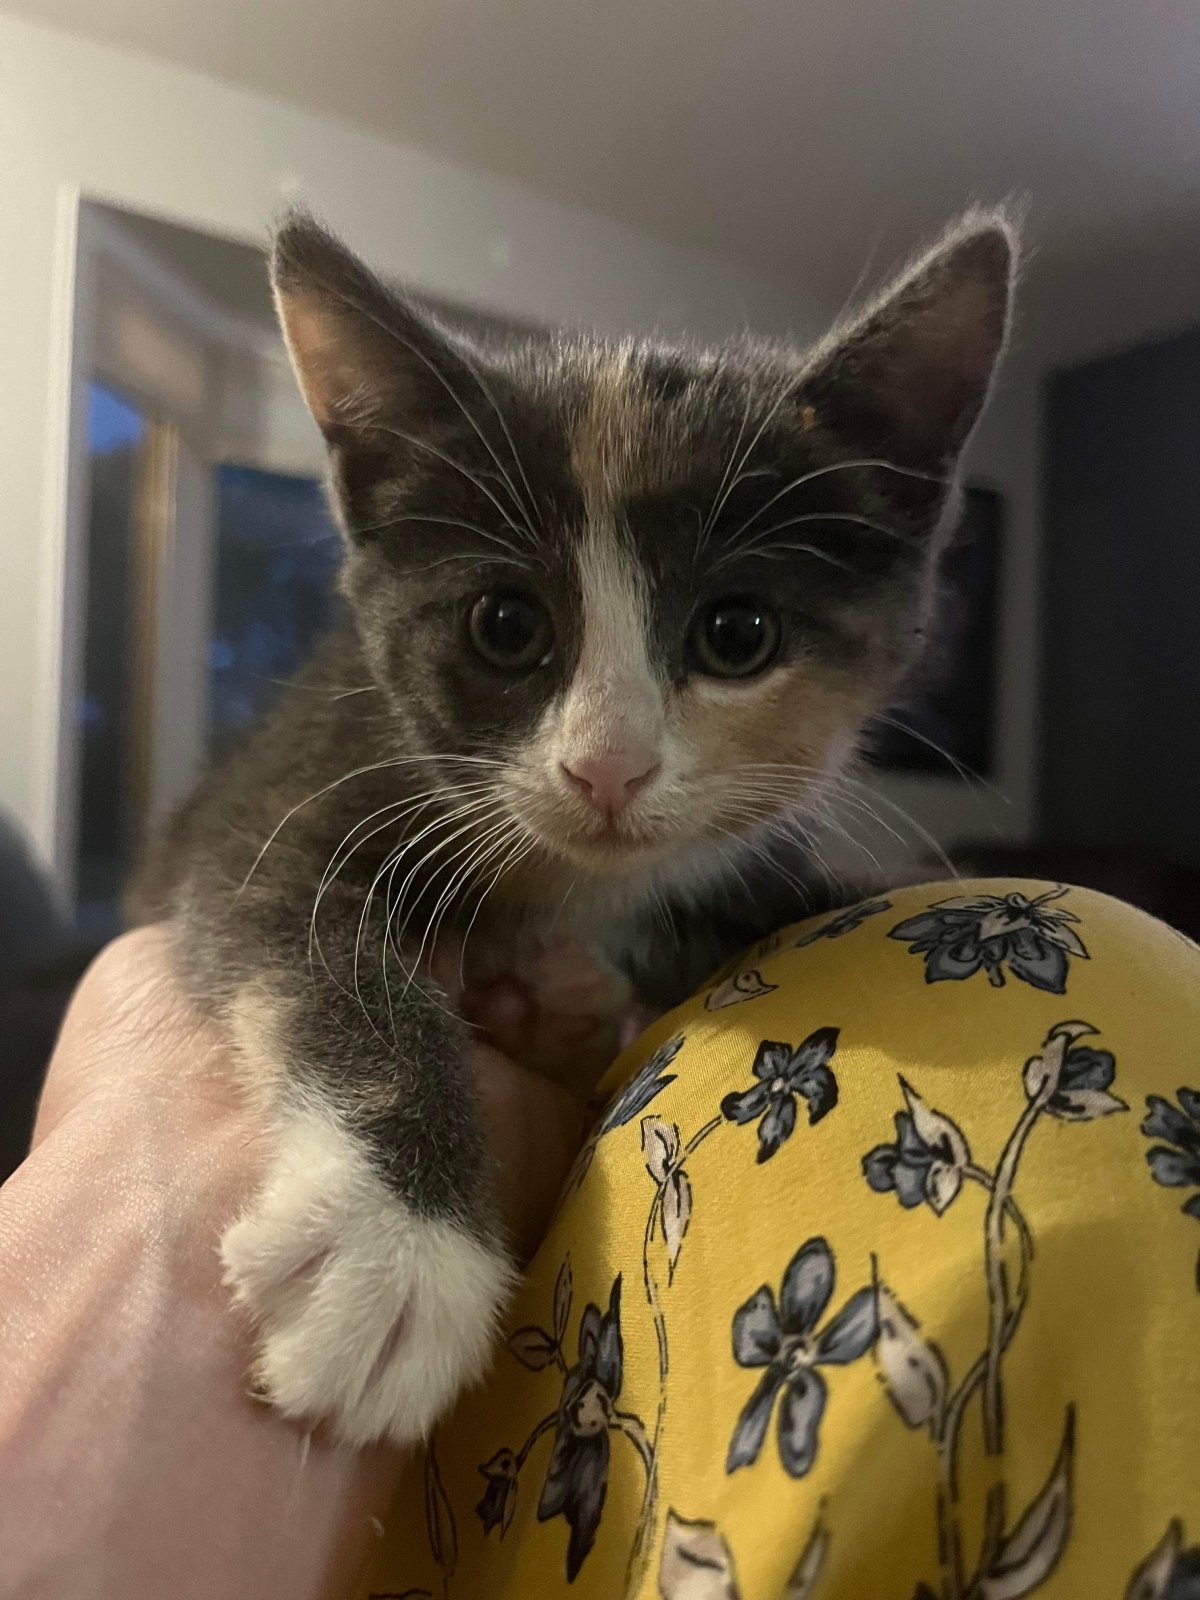 A small cat rescue based out of Lumsden is seeking a forever home for a seven-week-old kitten that was paralyzed, possibly temporarily, by a dog attack.